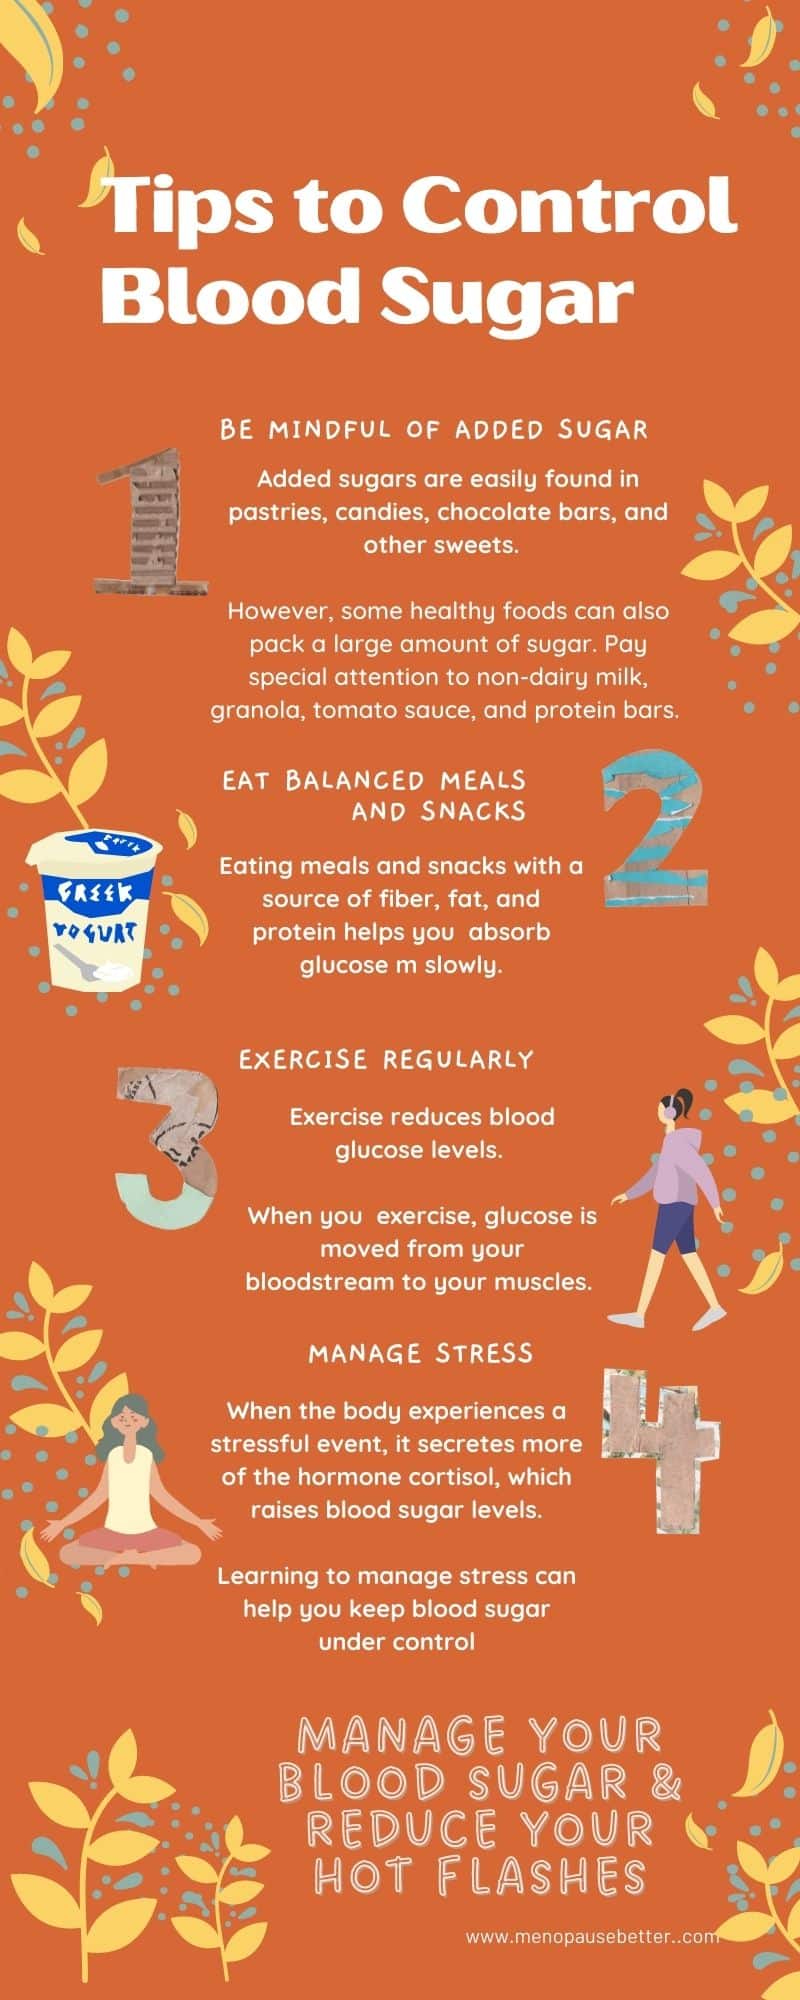 Tips to control blood sugar infographic